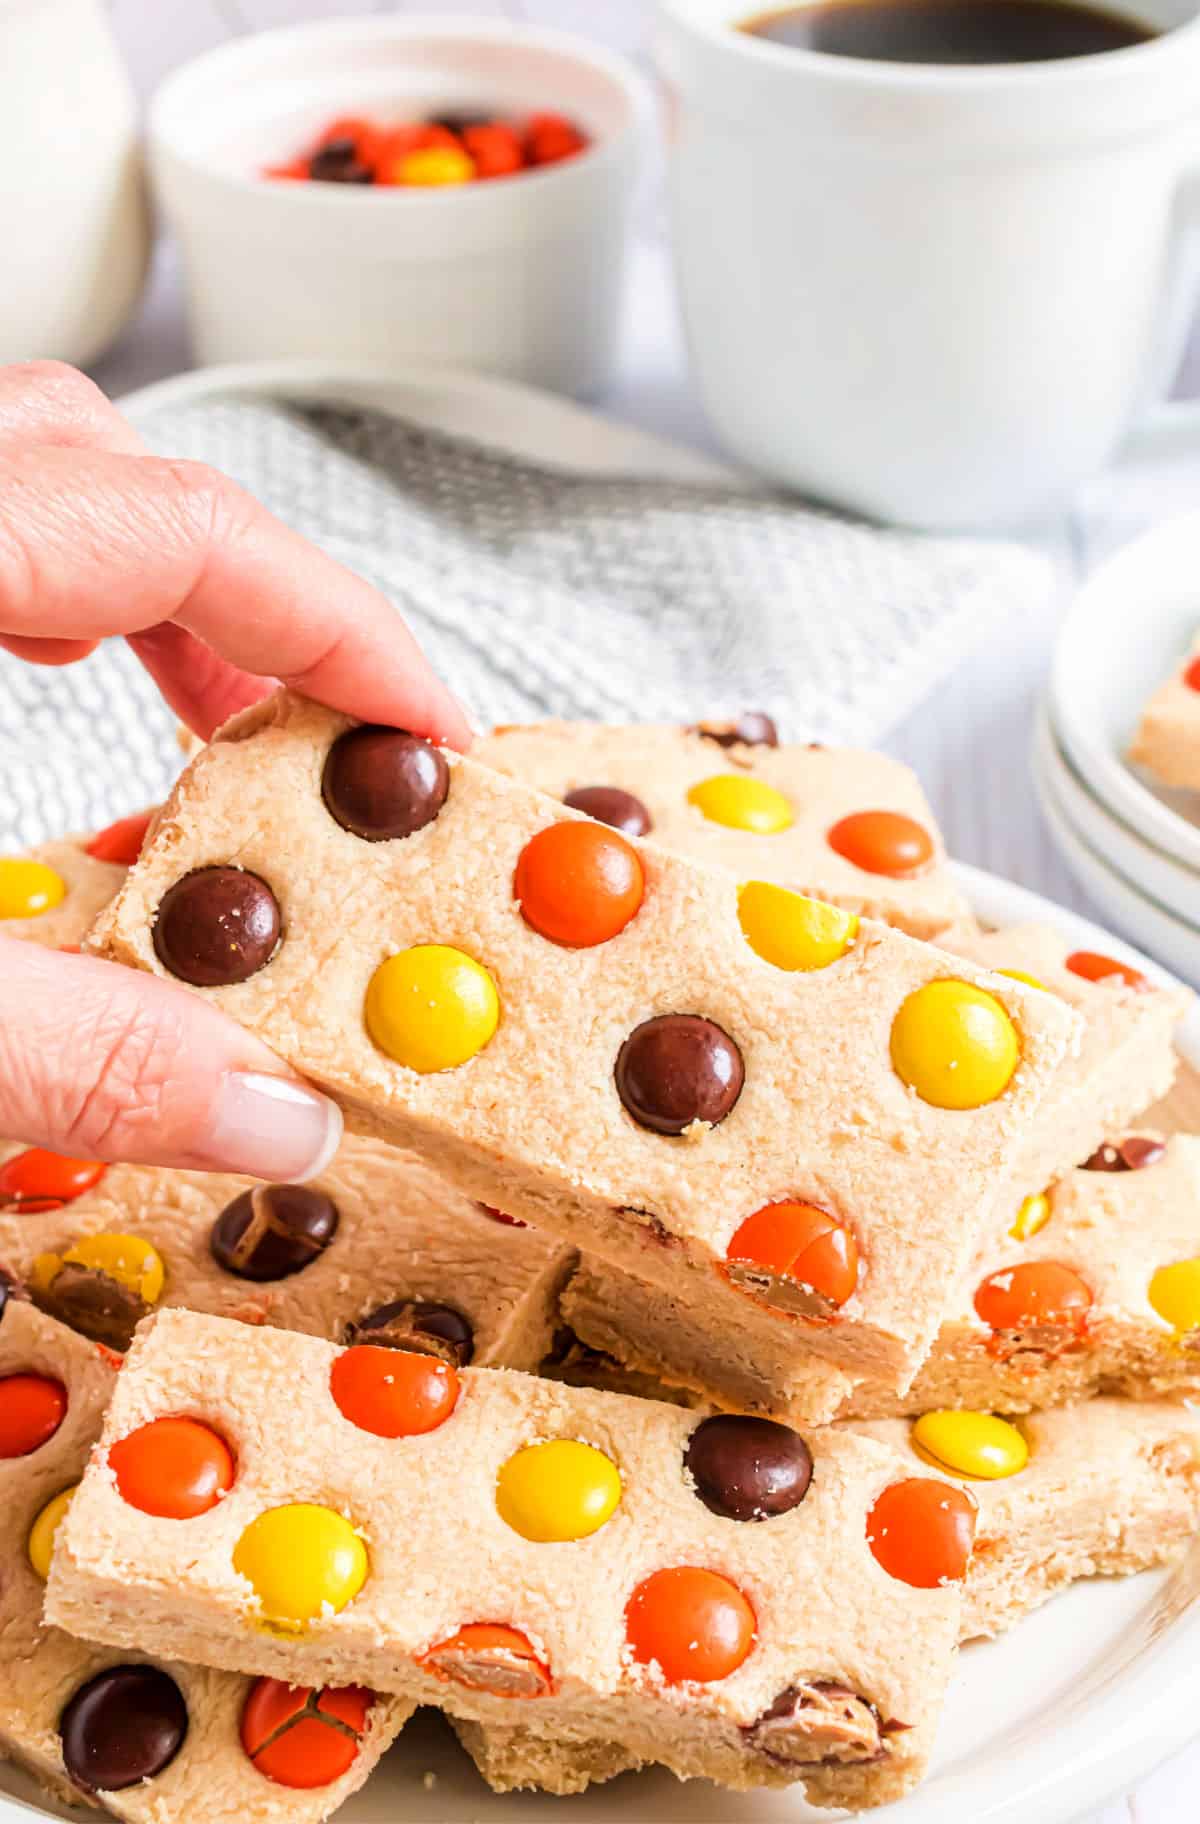 Shortbread bars with Reese's pieces on a serving plate.